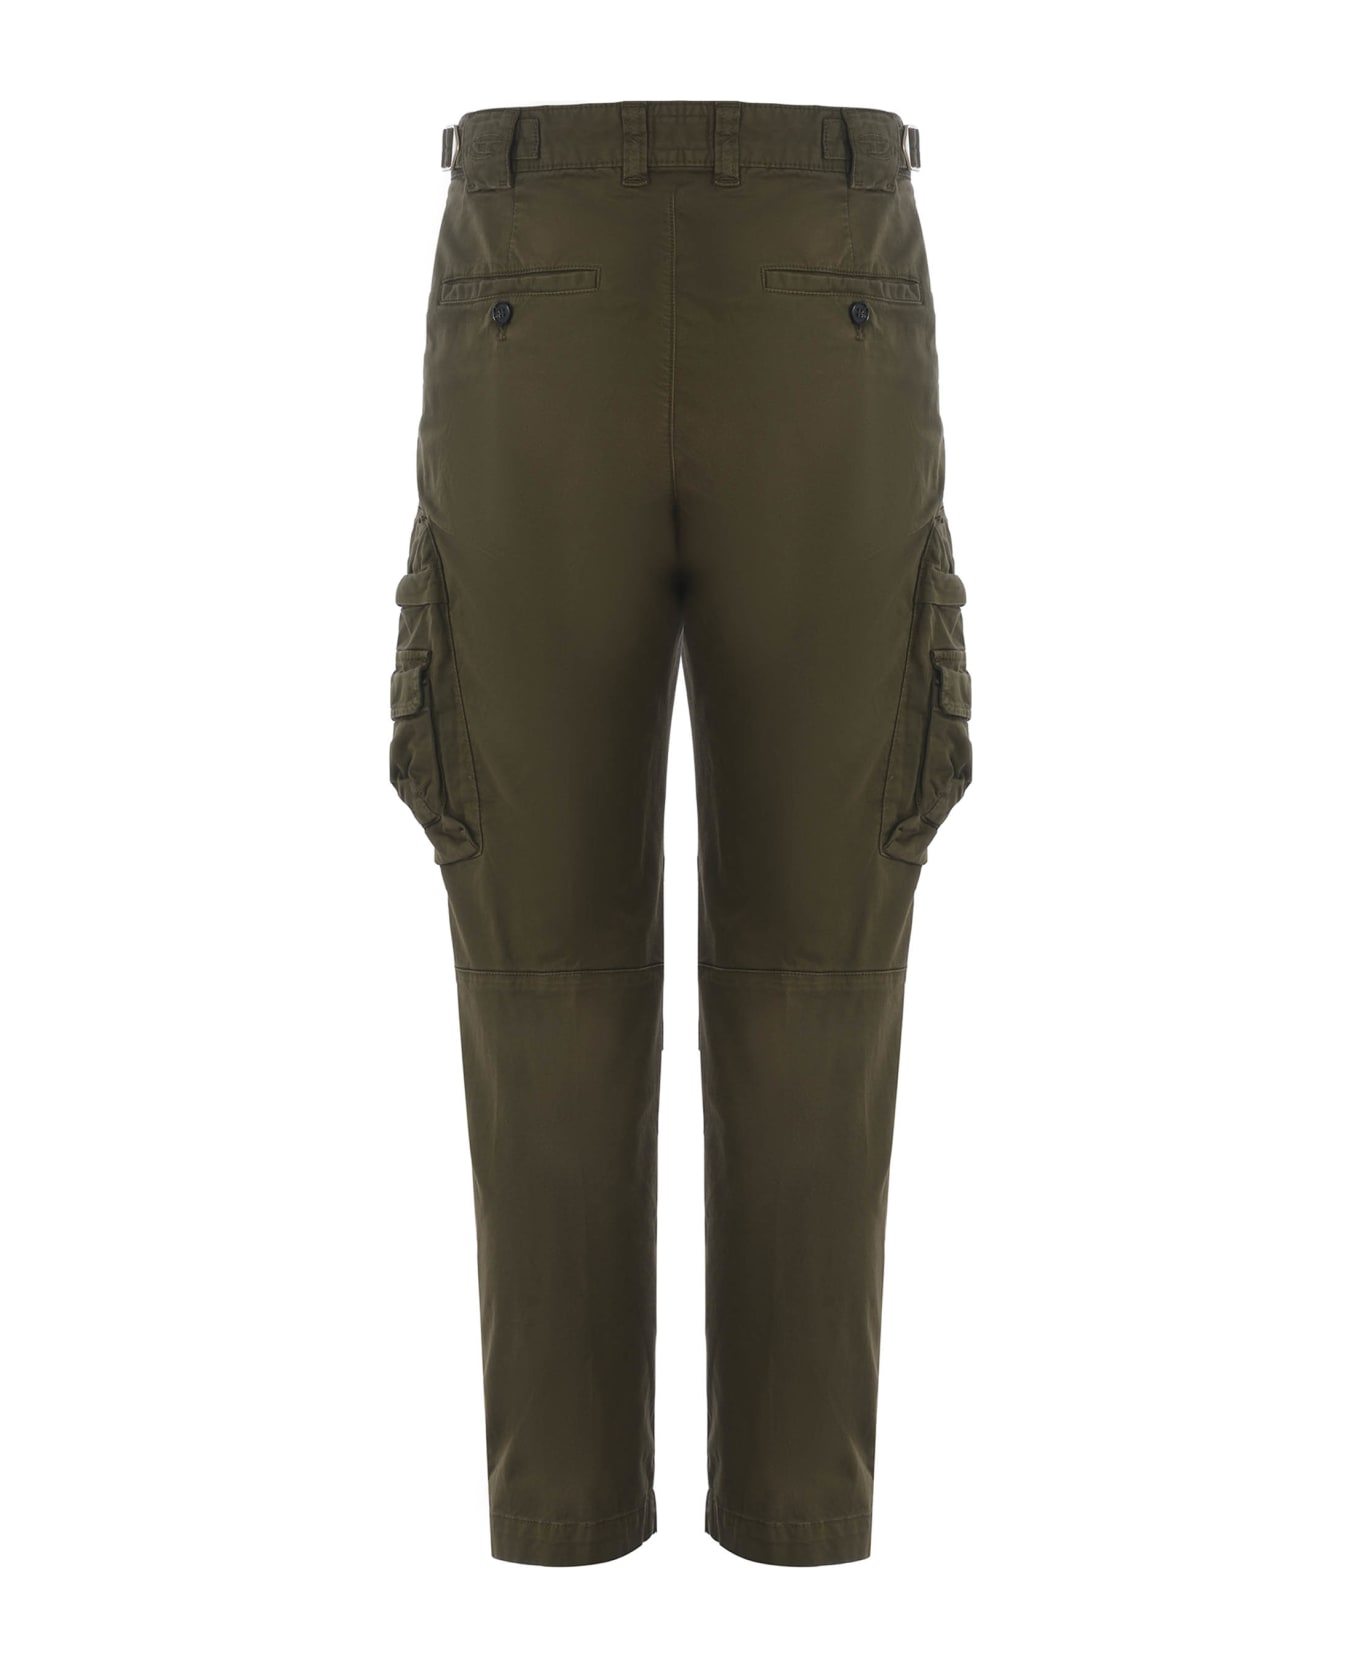 Diesel P-argym-new-a Faded Cargo Pants - Af Green